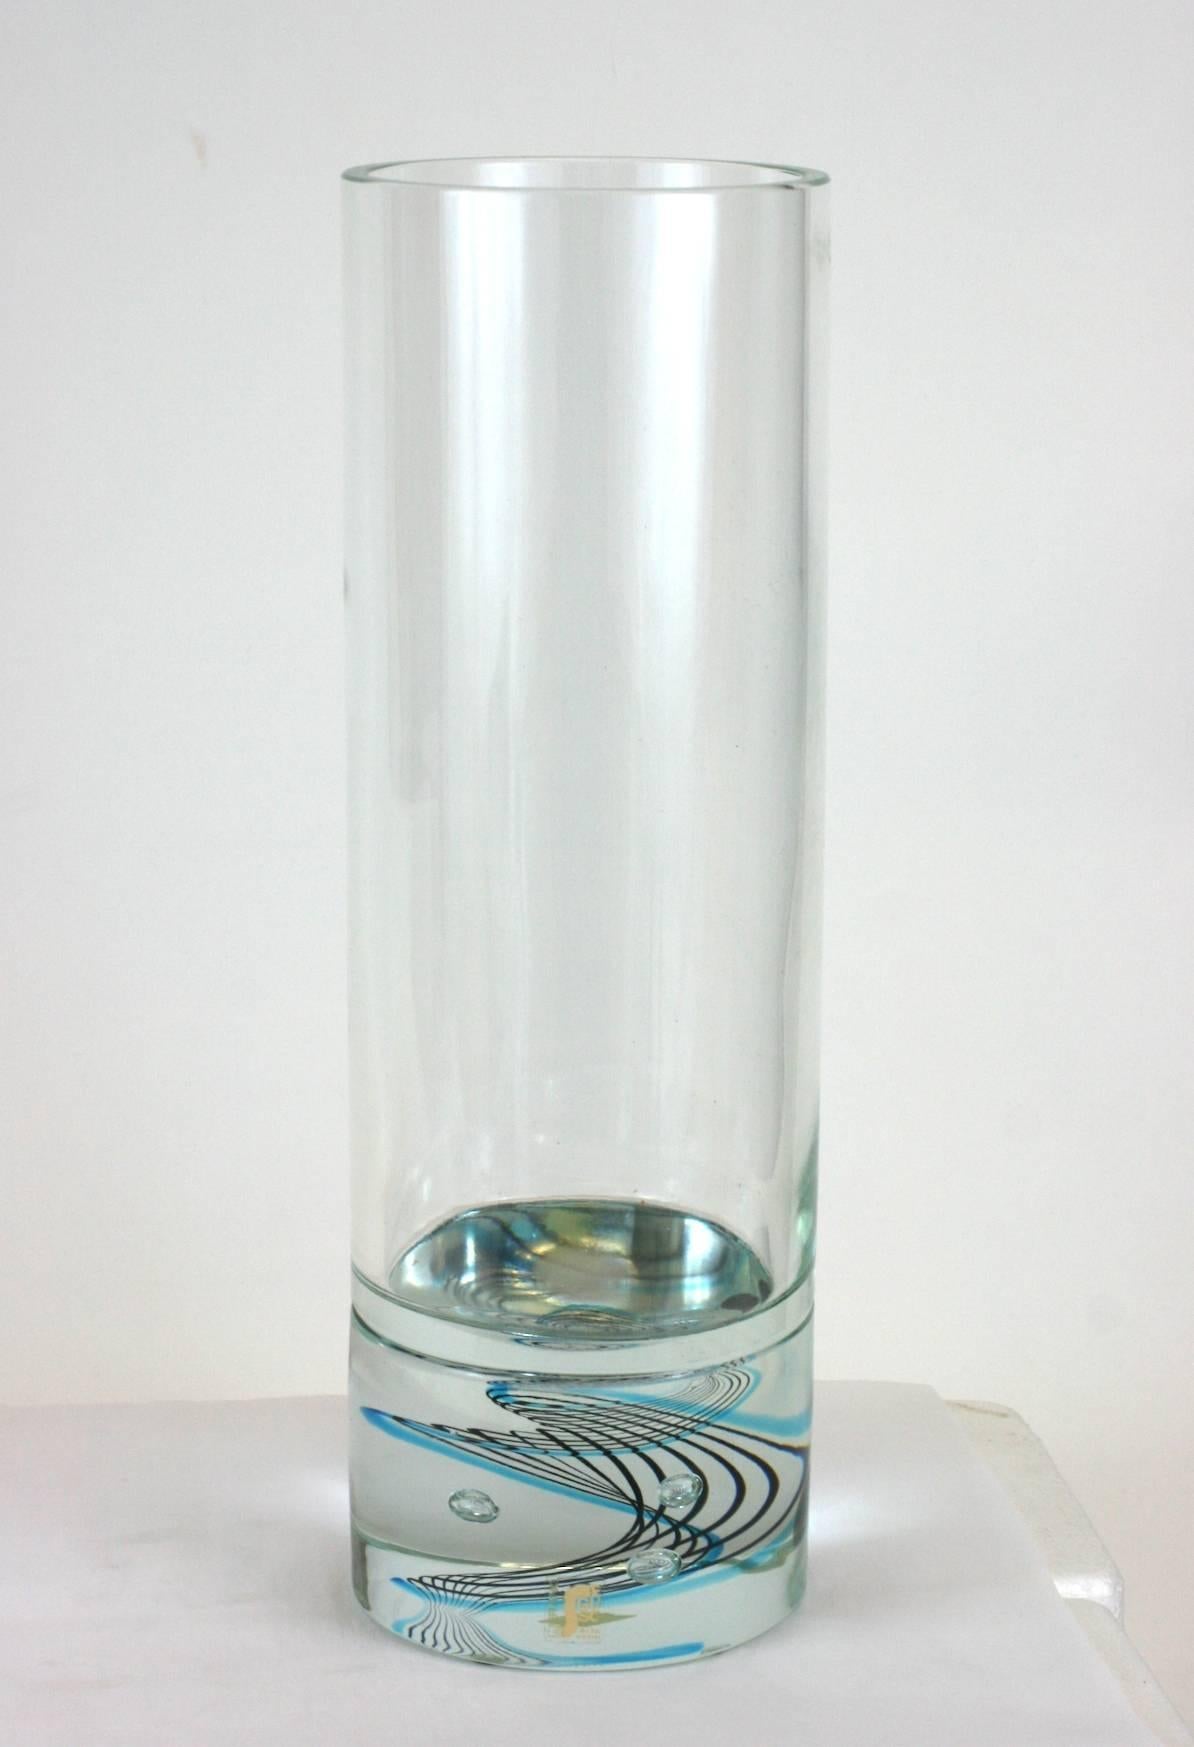 Large Seguso cylinder vase with internally decorated swirls of blue and black, 1960s Italy. Uncirculated sample stock, New.
Measures: 14.5